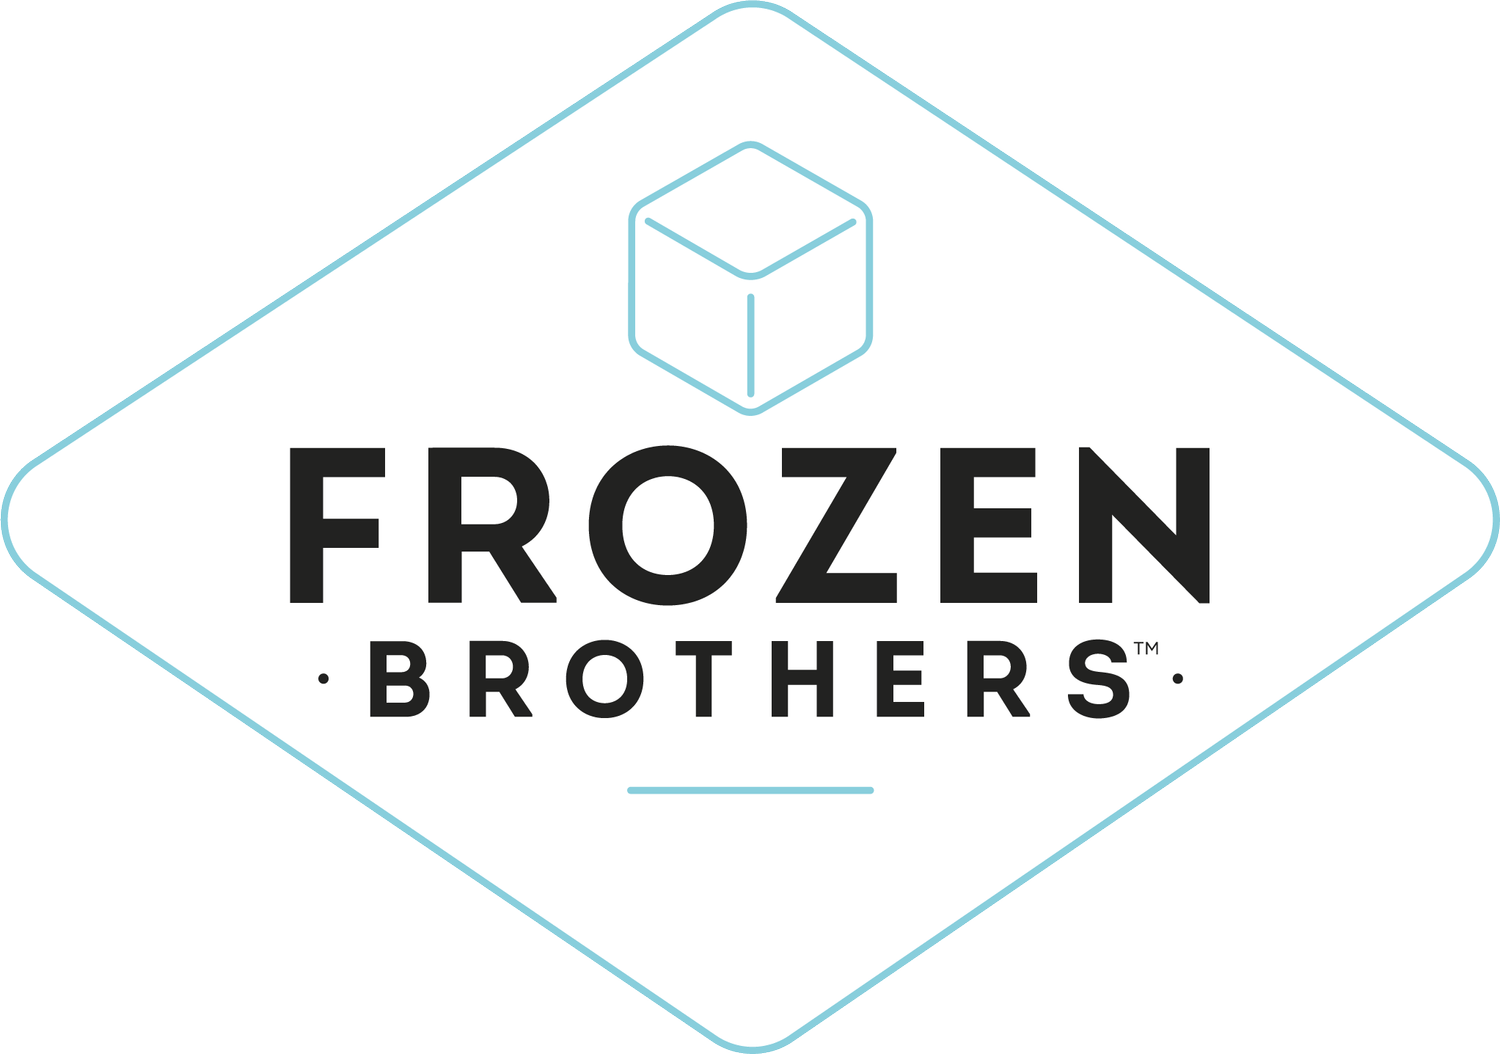 Frozen Brothers For Business